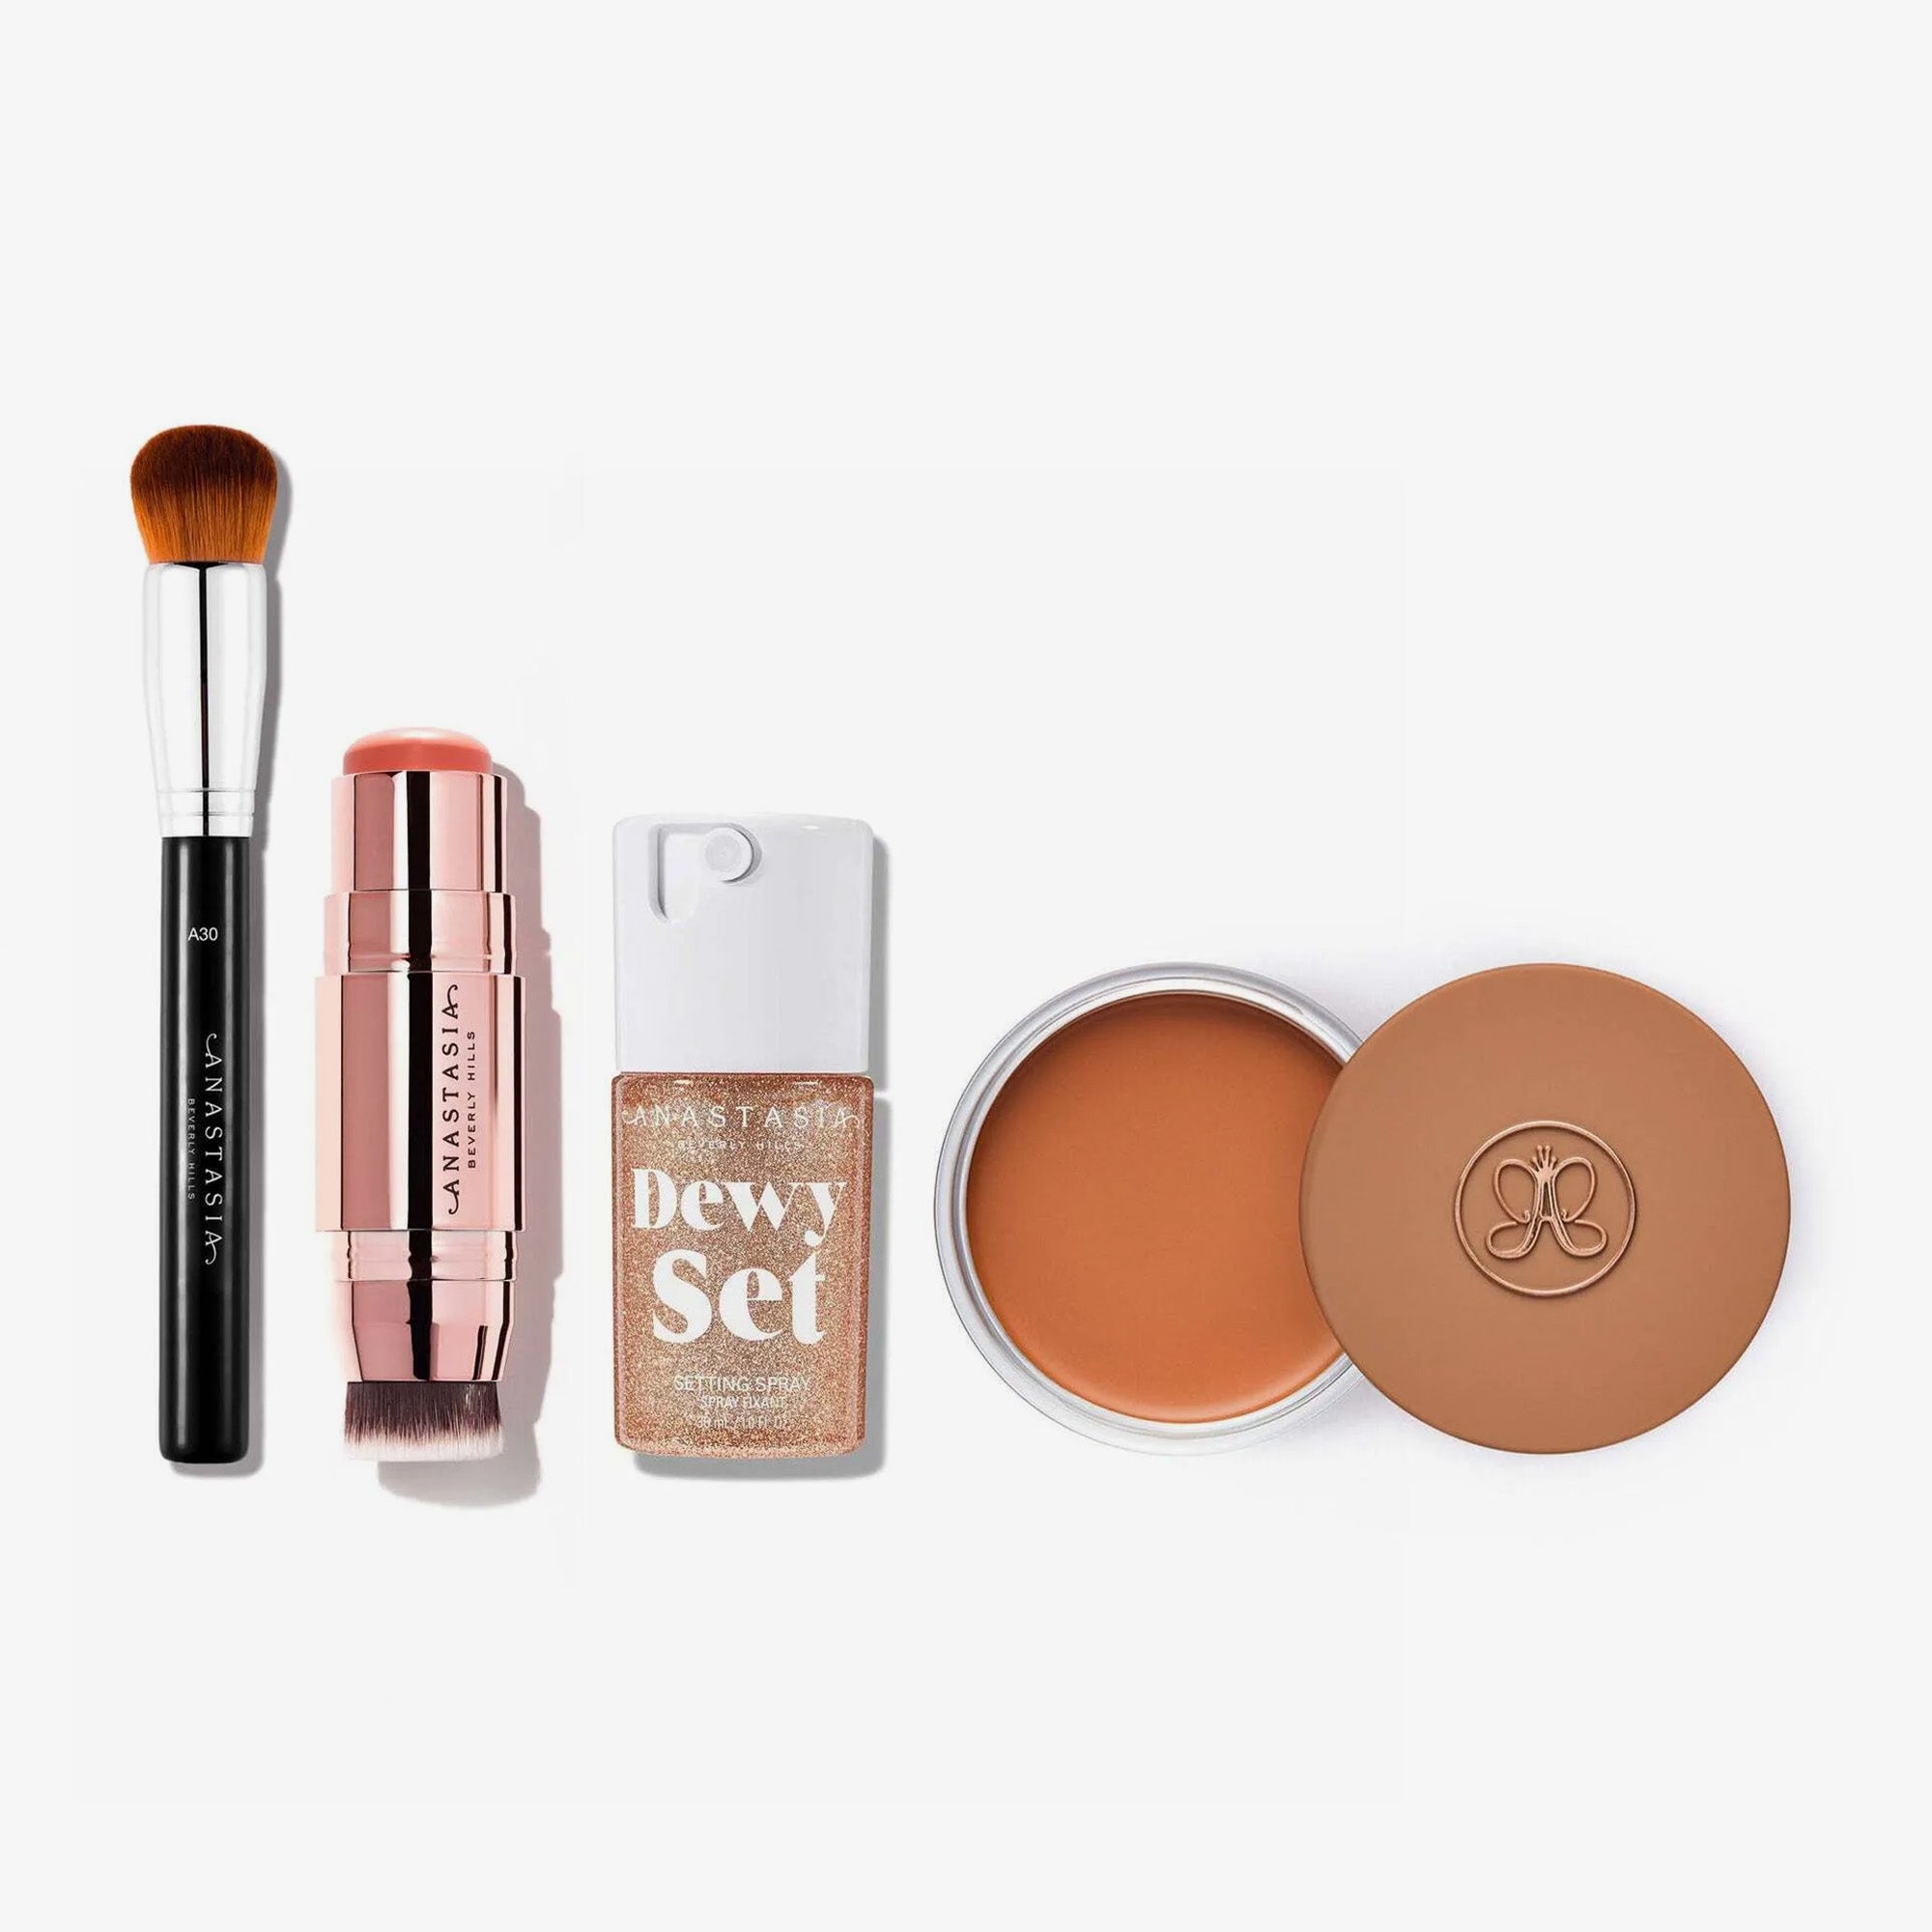 76 Prime Day Beauty Deals Endorsed by Our Editors